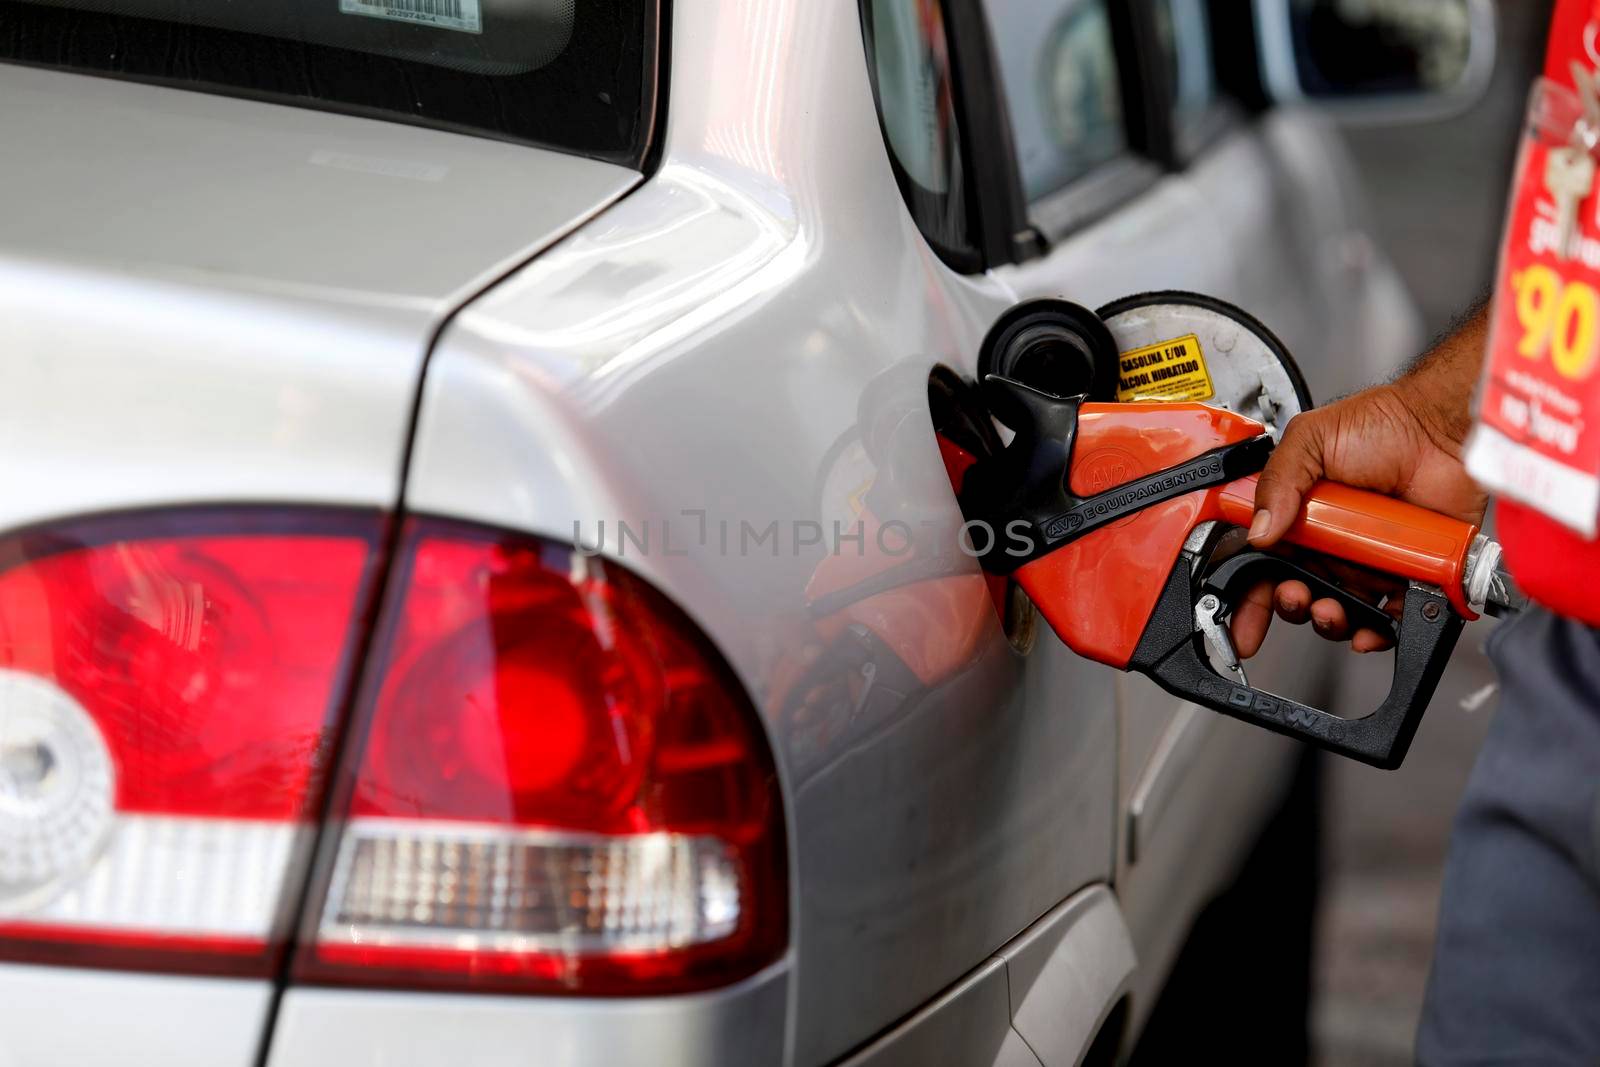 salvador, bahia / brazil - august 20, 2019: gas station attendant is seen fueling a vehicle at a gas station in the city of Salvador.
